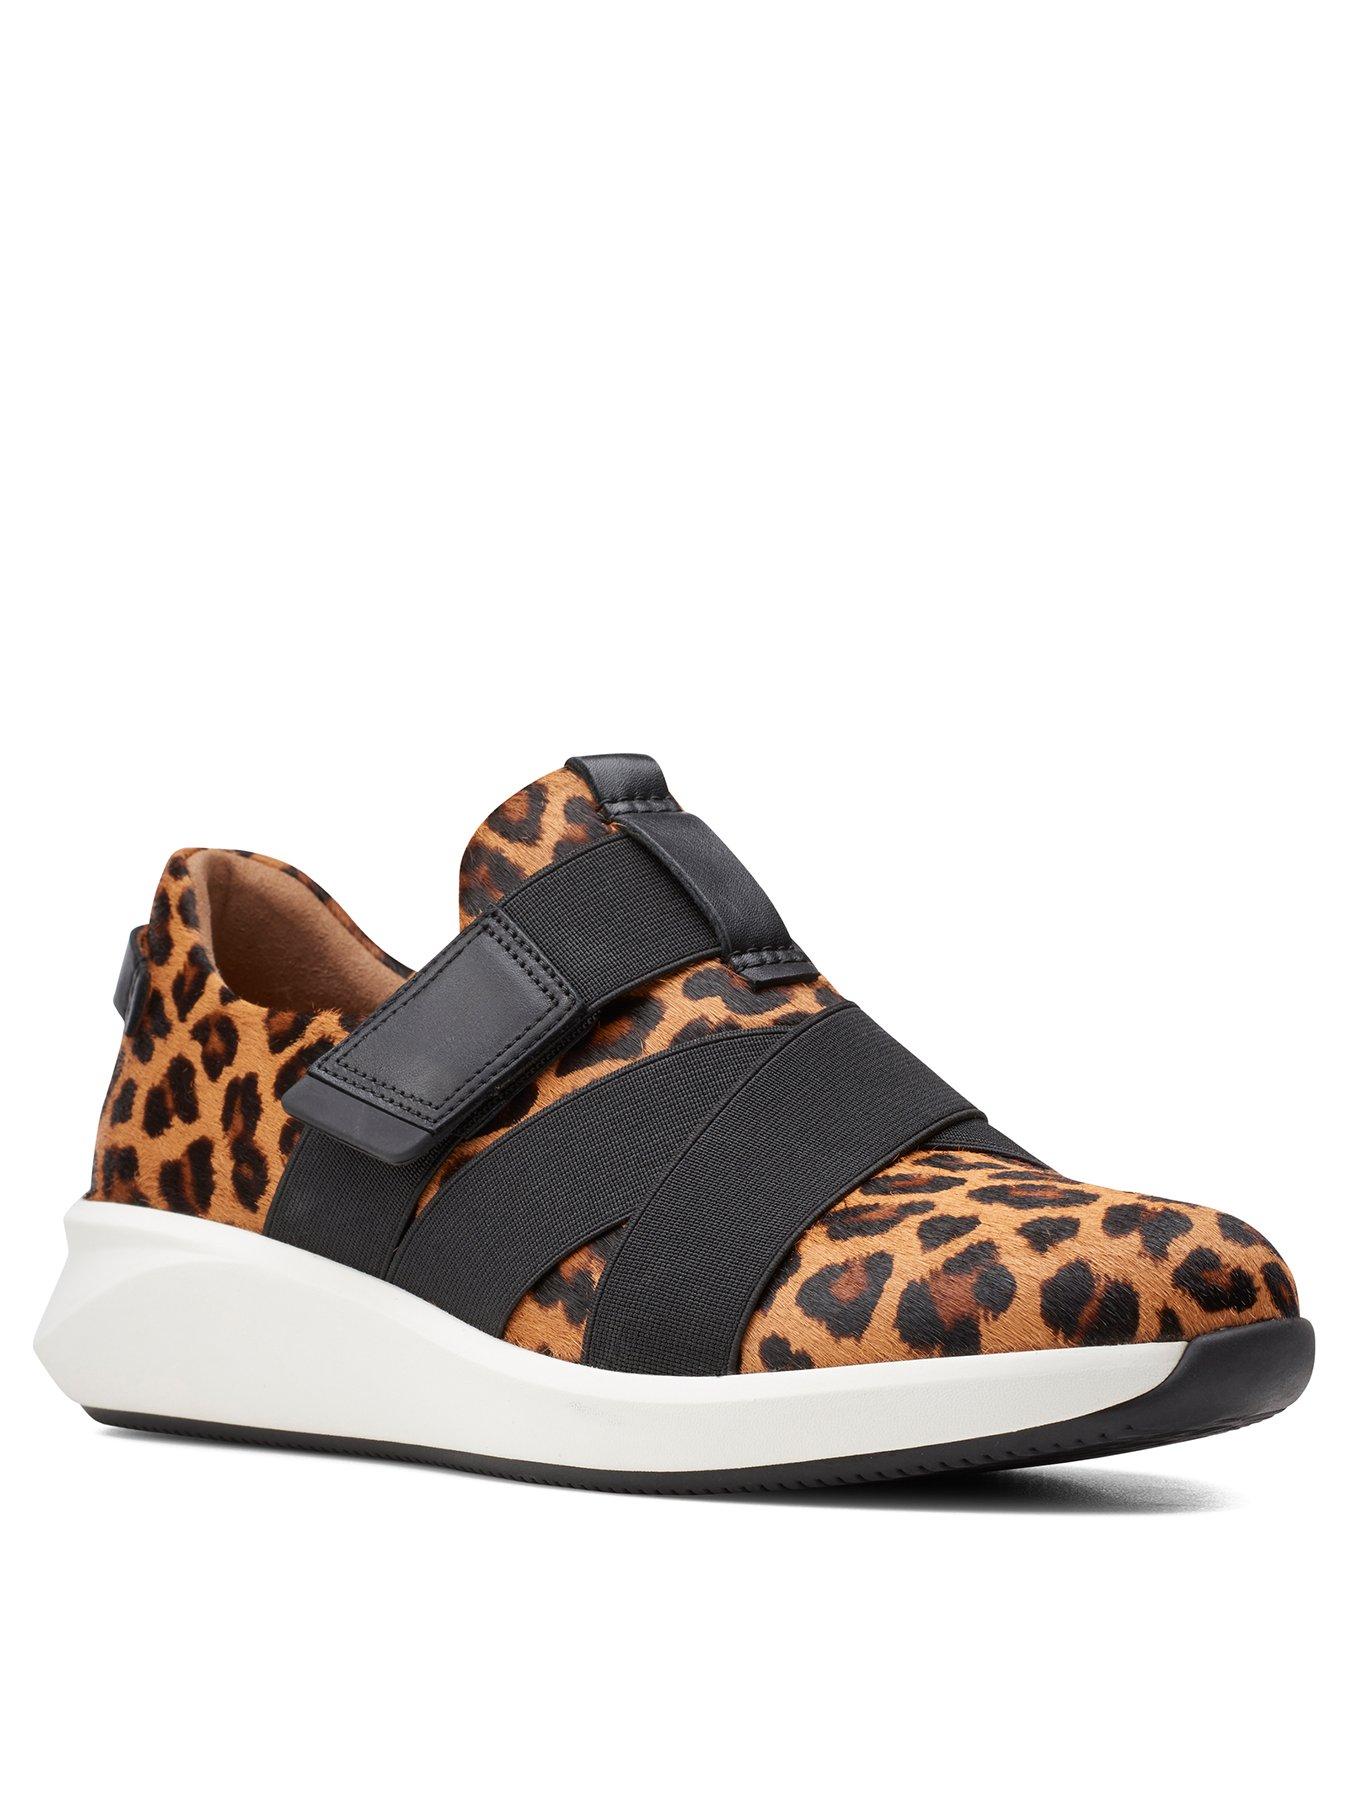 clarks leopard trainers